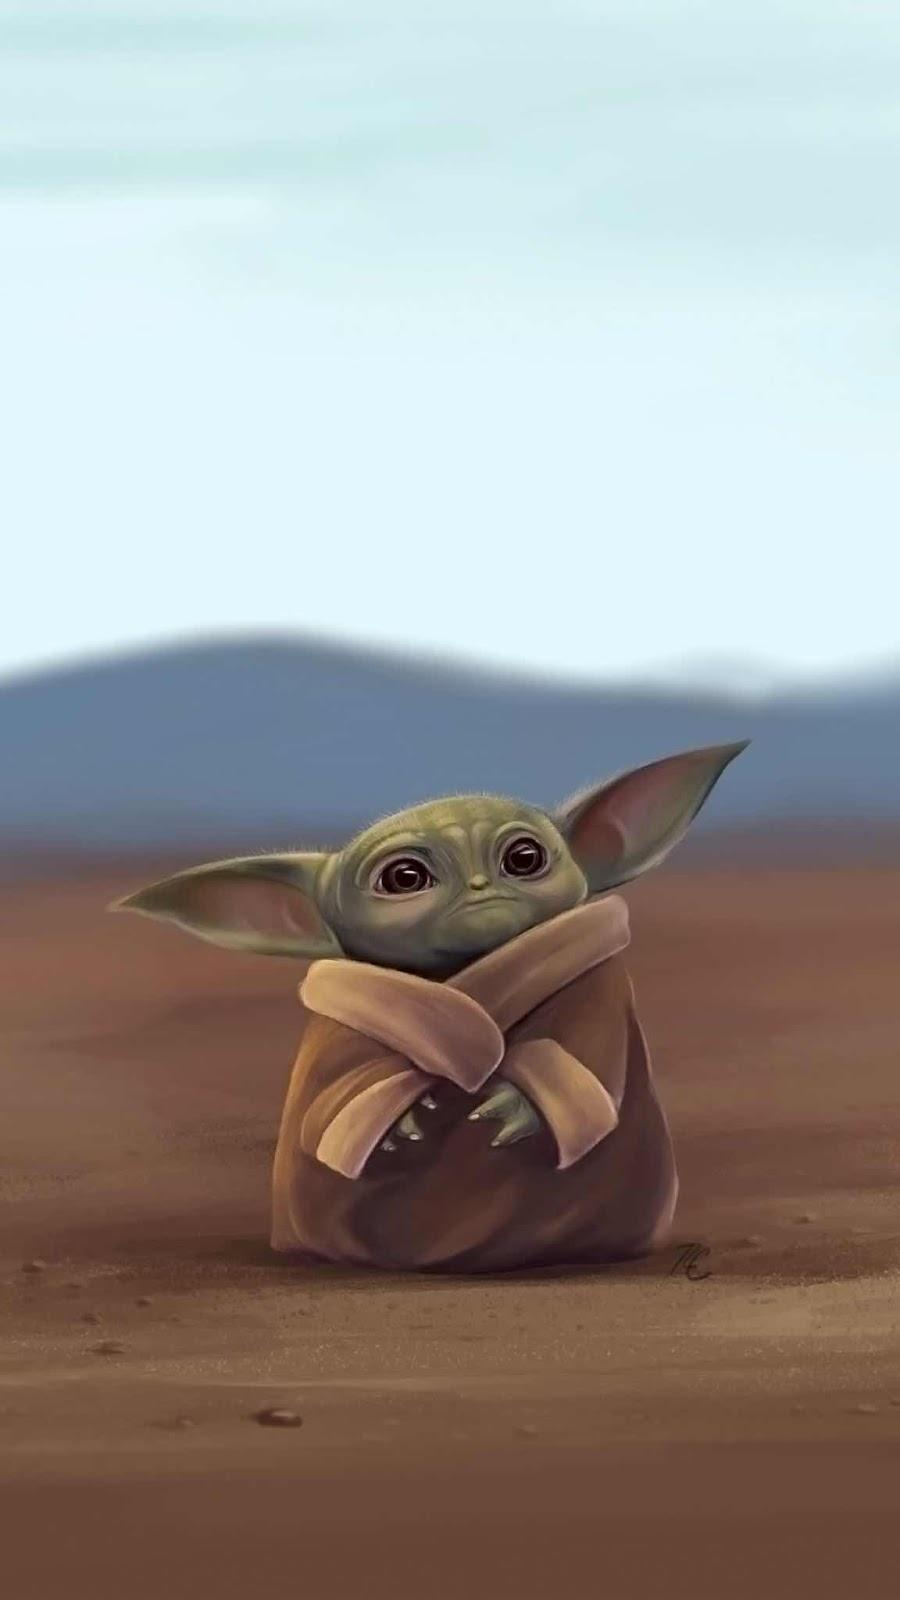 iPhone and Android Wallpapers: Baby Yoda Wallpapers for iPhone and